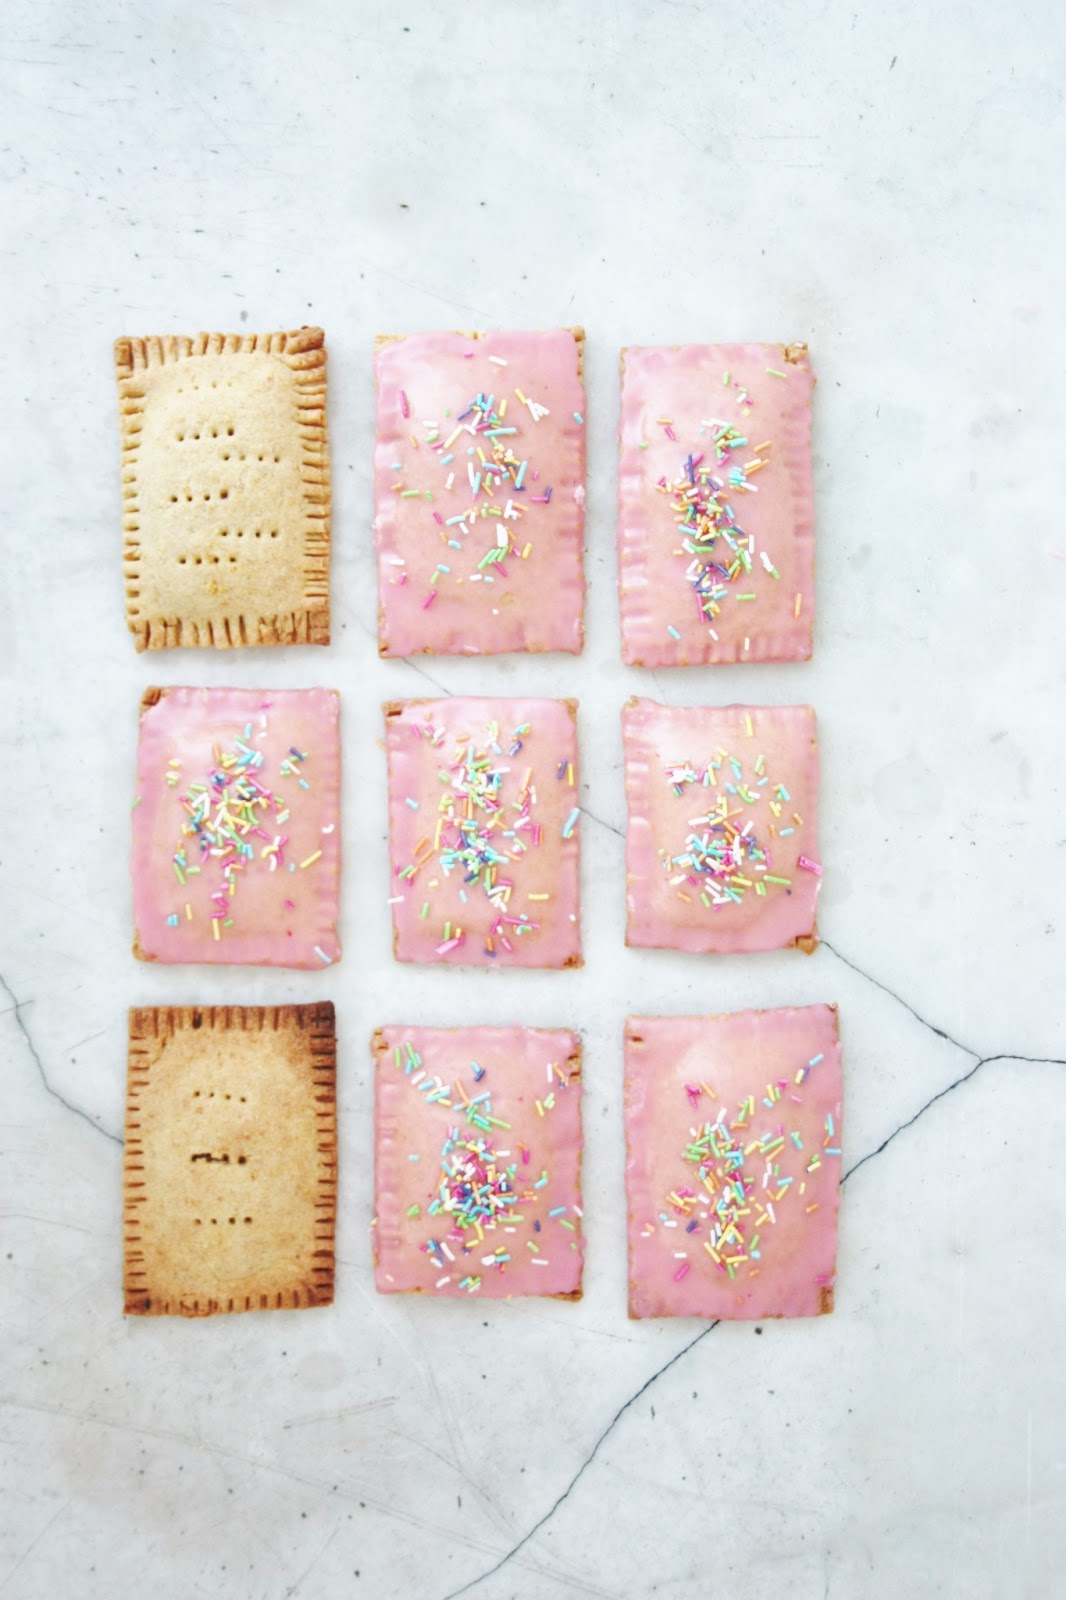 everything is poetry: homemade pop tarts